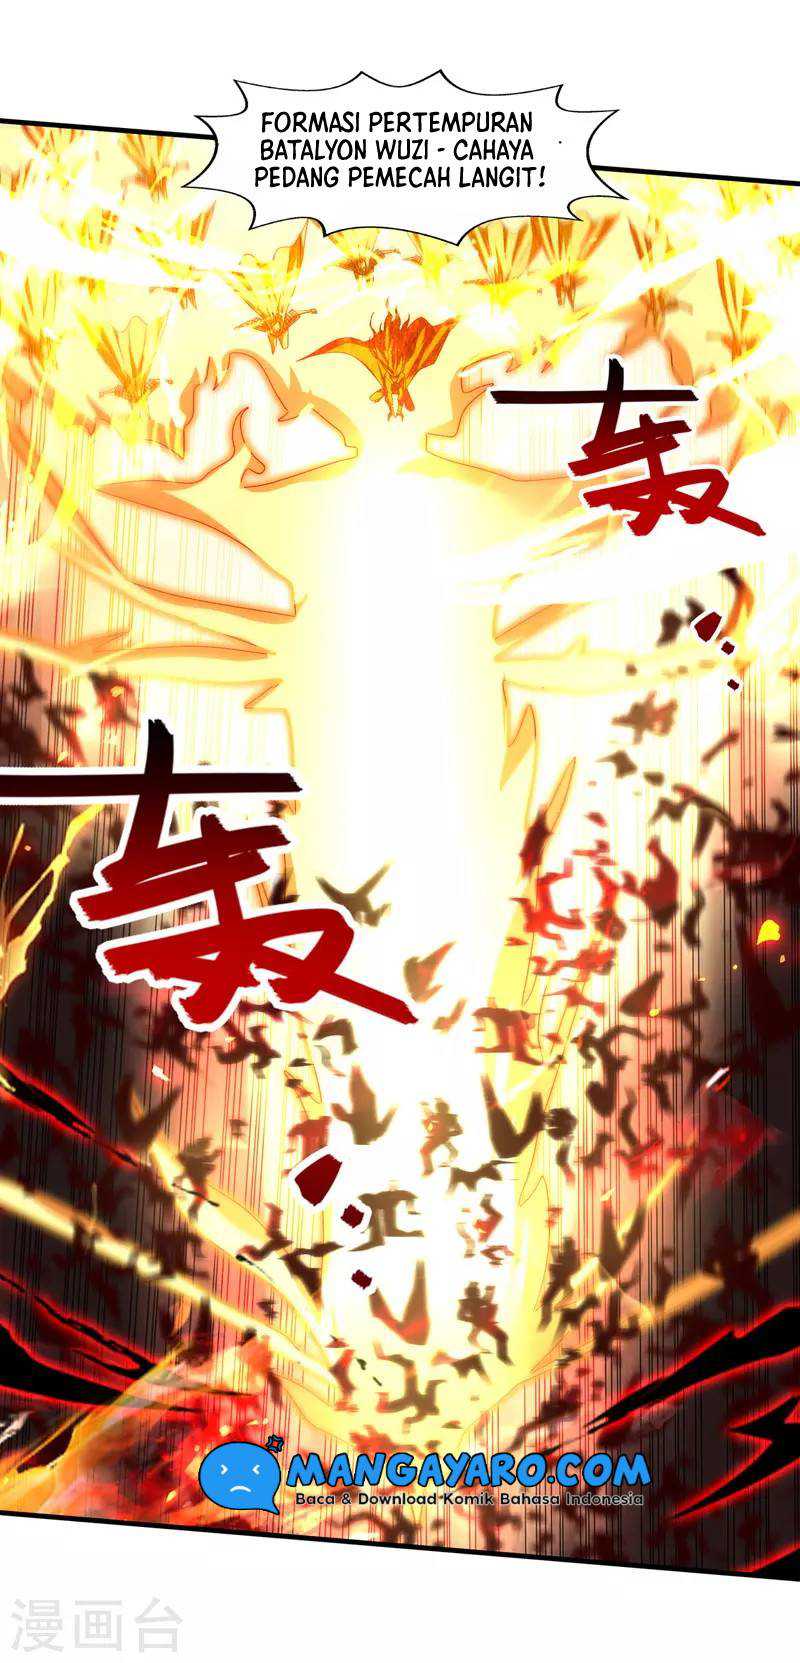 Against The Heaven Supreme (Heaven Guards) Chapter 69